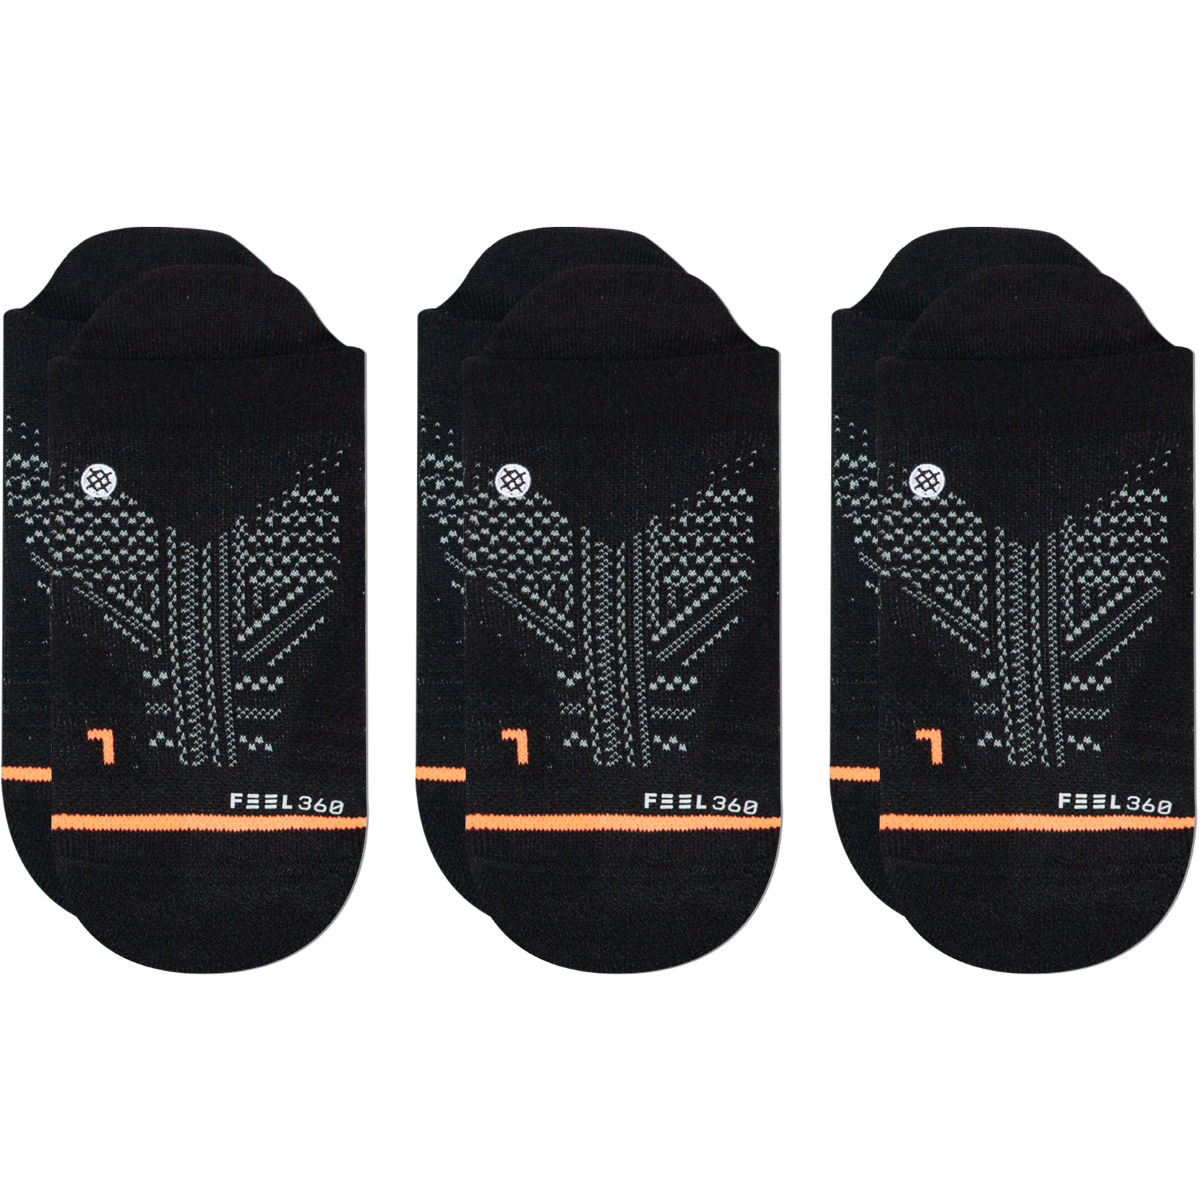 Calcetines tobilleros Stance Train para mujer (lote de 3) - Calcetines